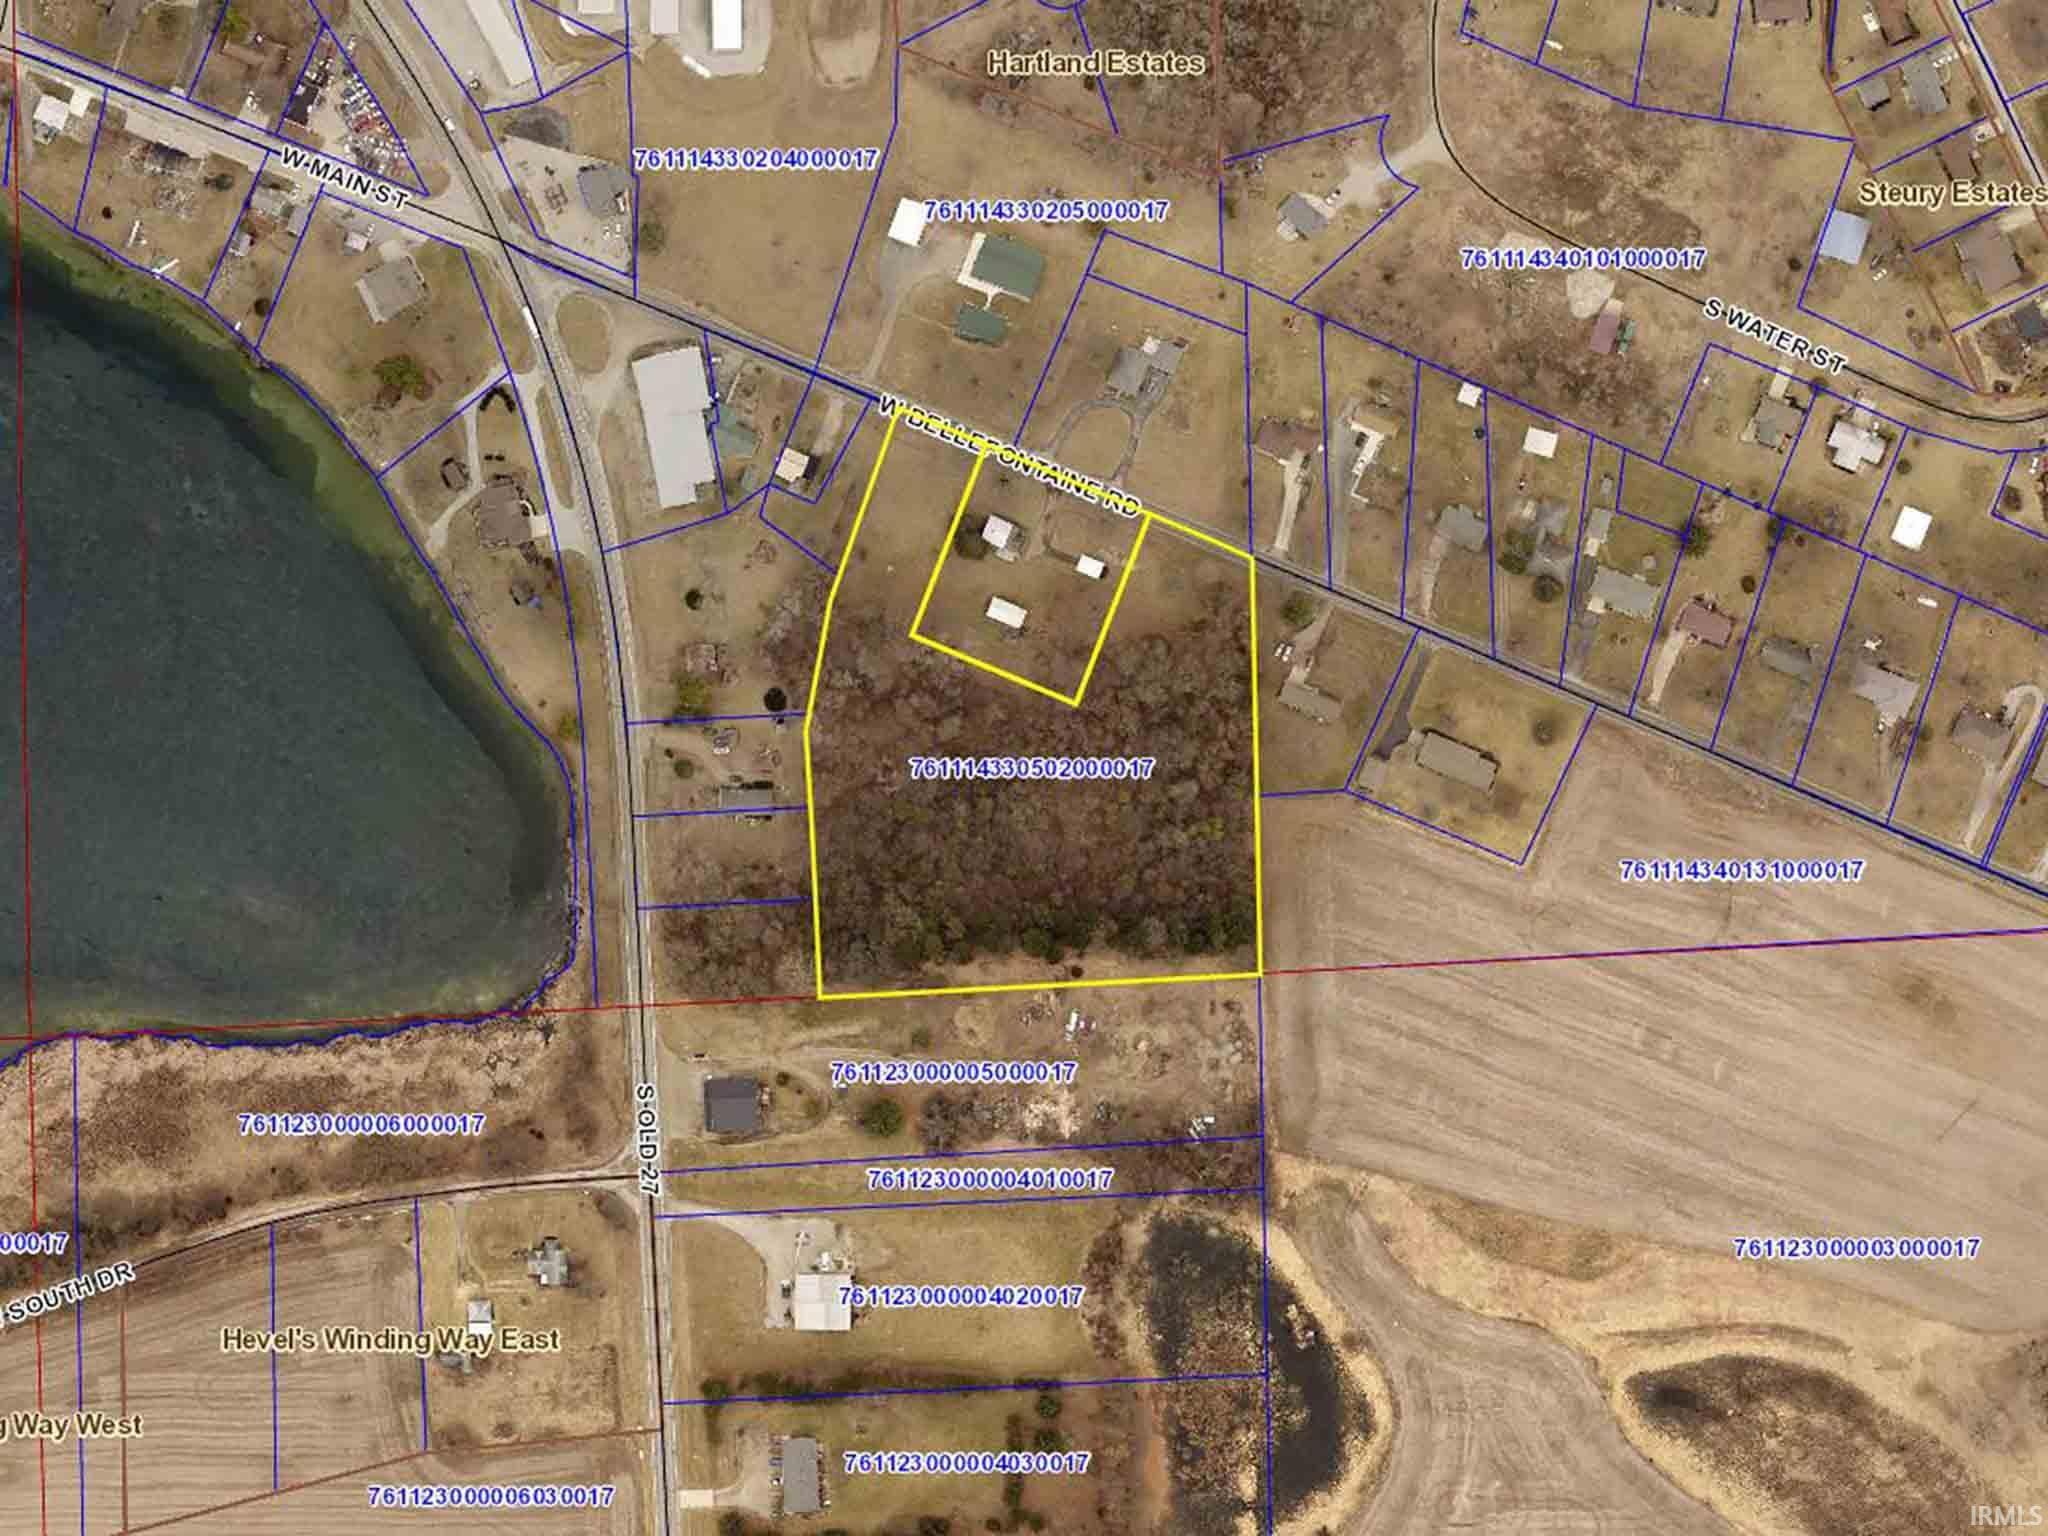 GIS view of property.